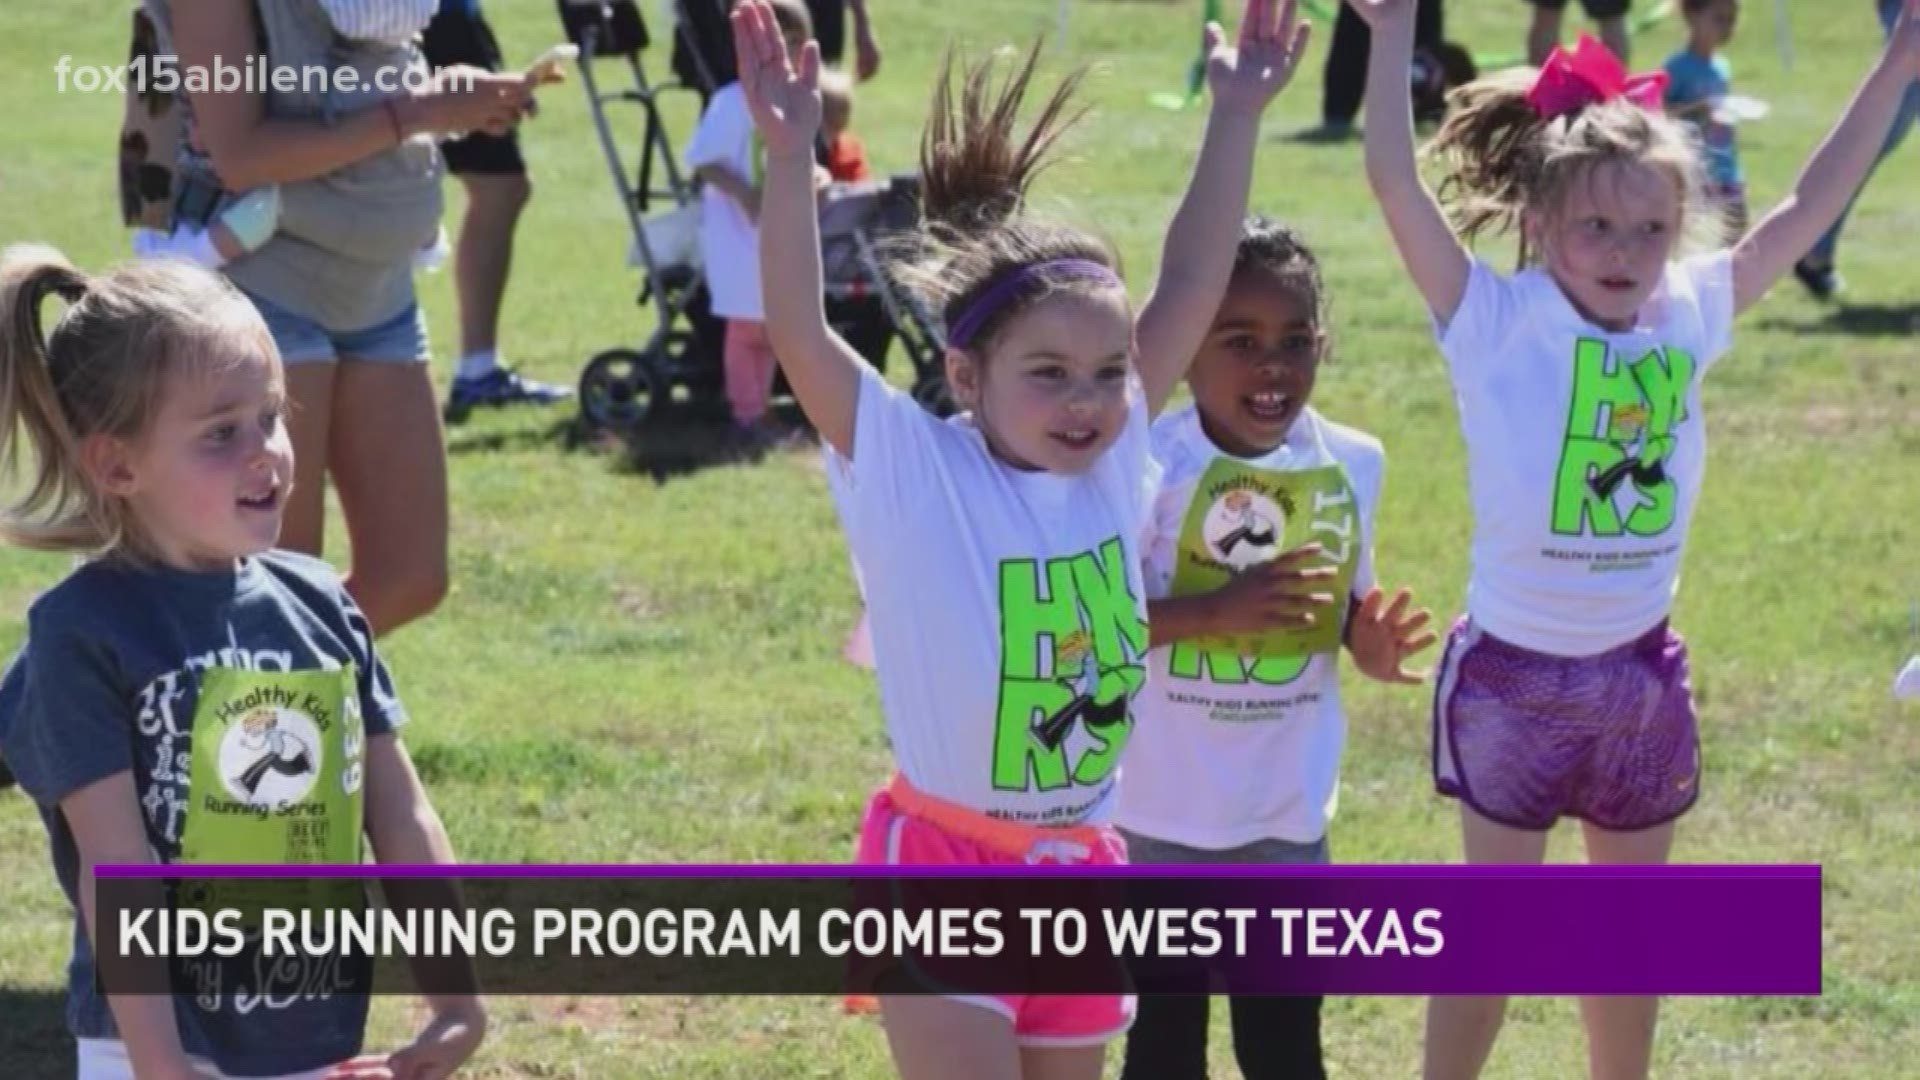 Kids health Program coming to West Texas.